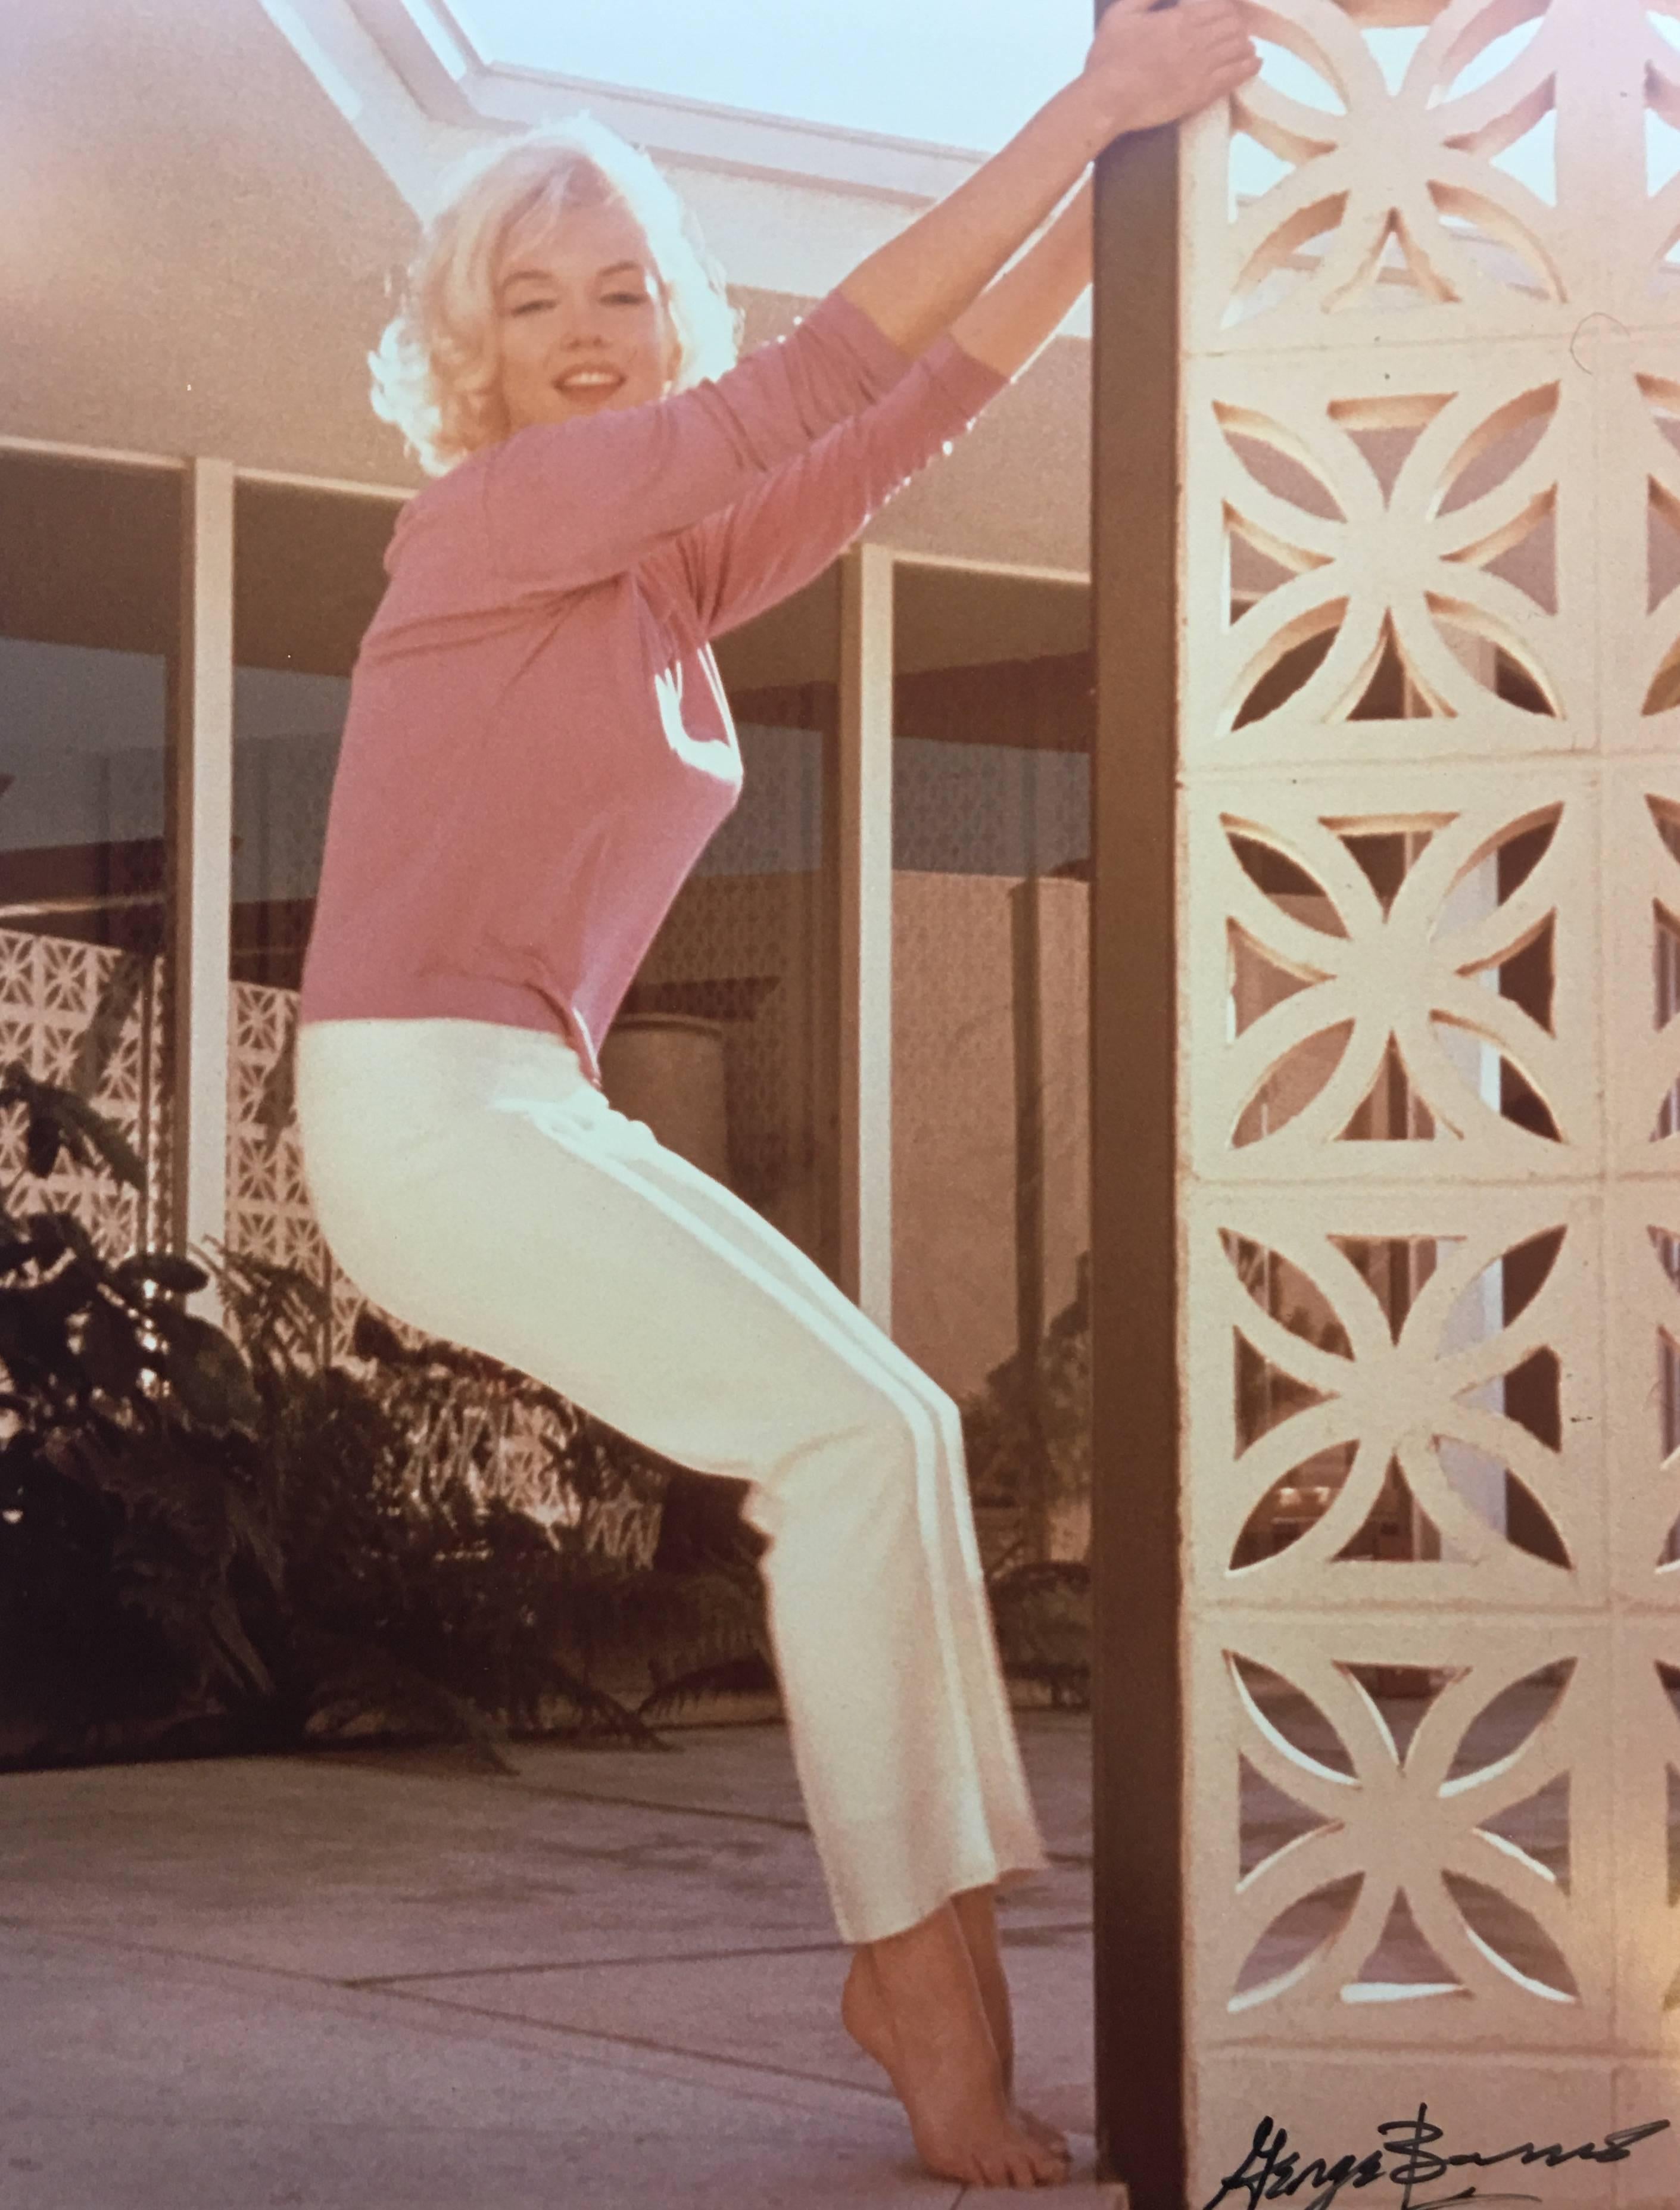 This photograph of Marilyn Monroe was shot by photographer, George Barris, in 1962 at the North Hollywood home of Barris' close friend.  Taken only two weeks before her death, this photograph is part of a series titled "The Last Photos".

This piece